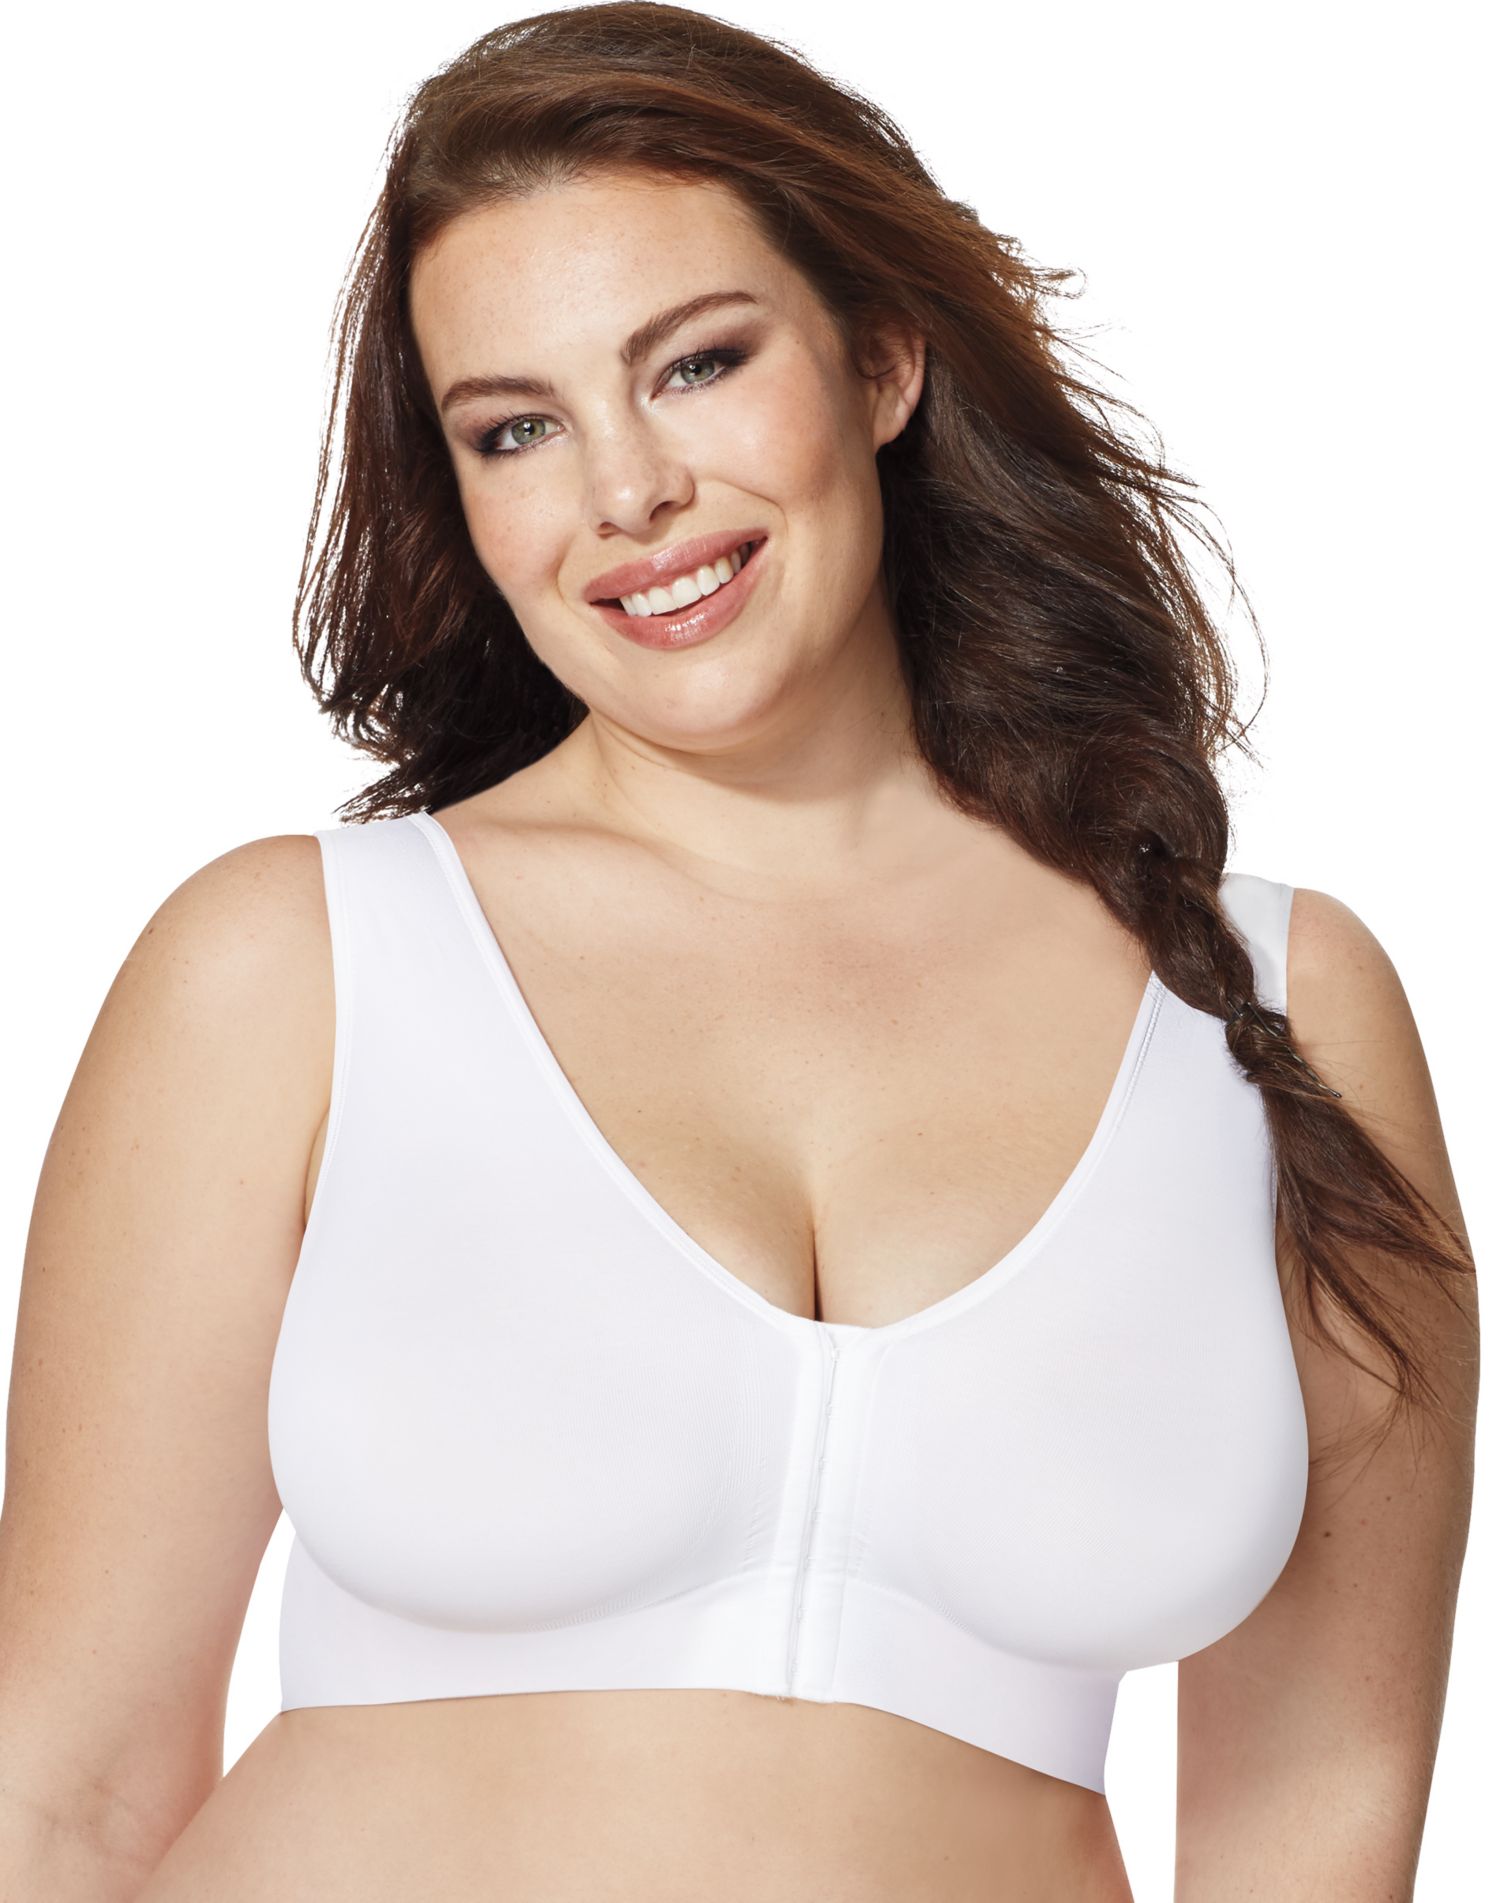 Just My Size Pure Comfort Seamless Wirefree Bra with Moisture